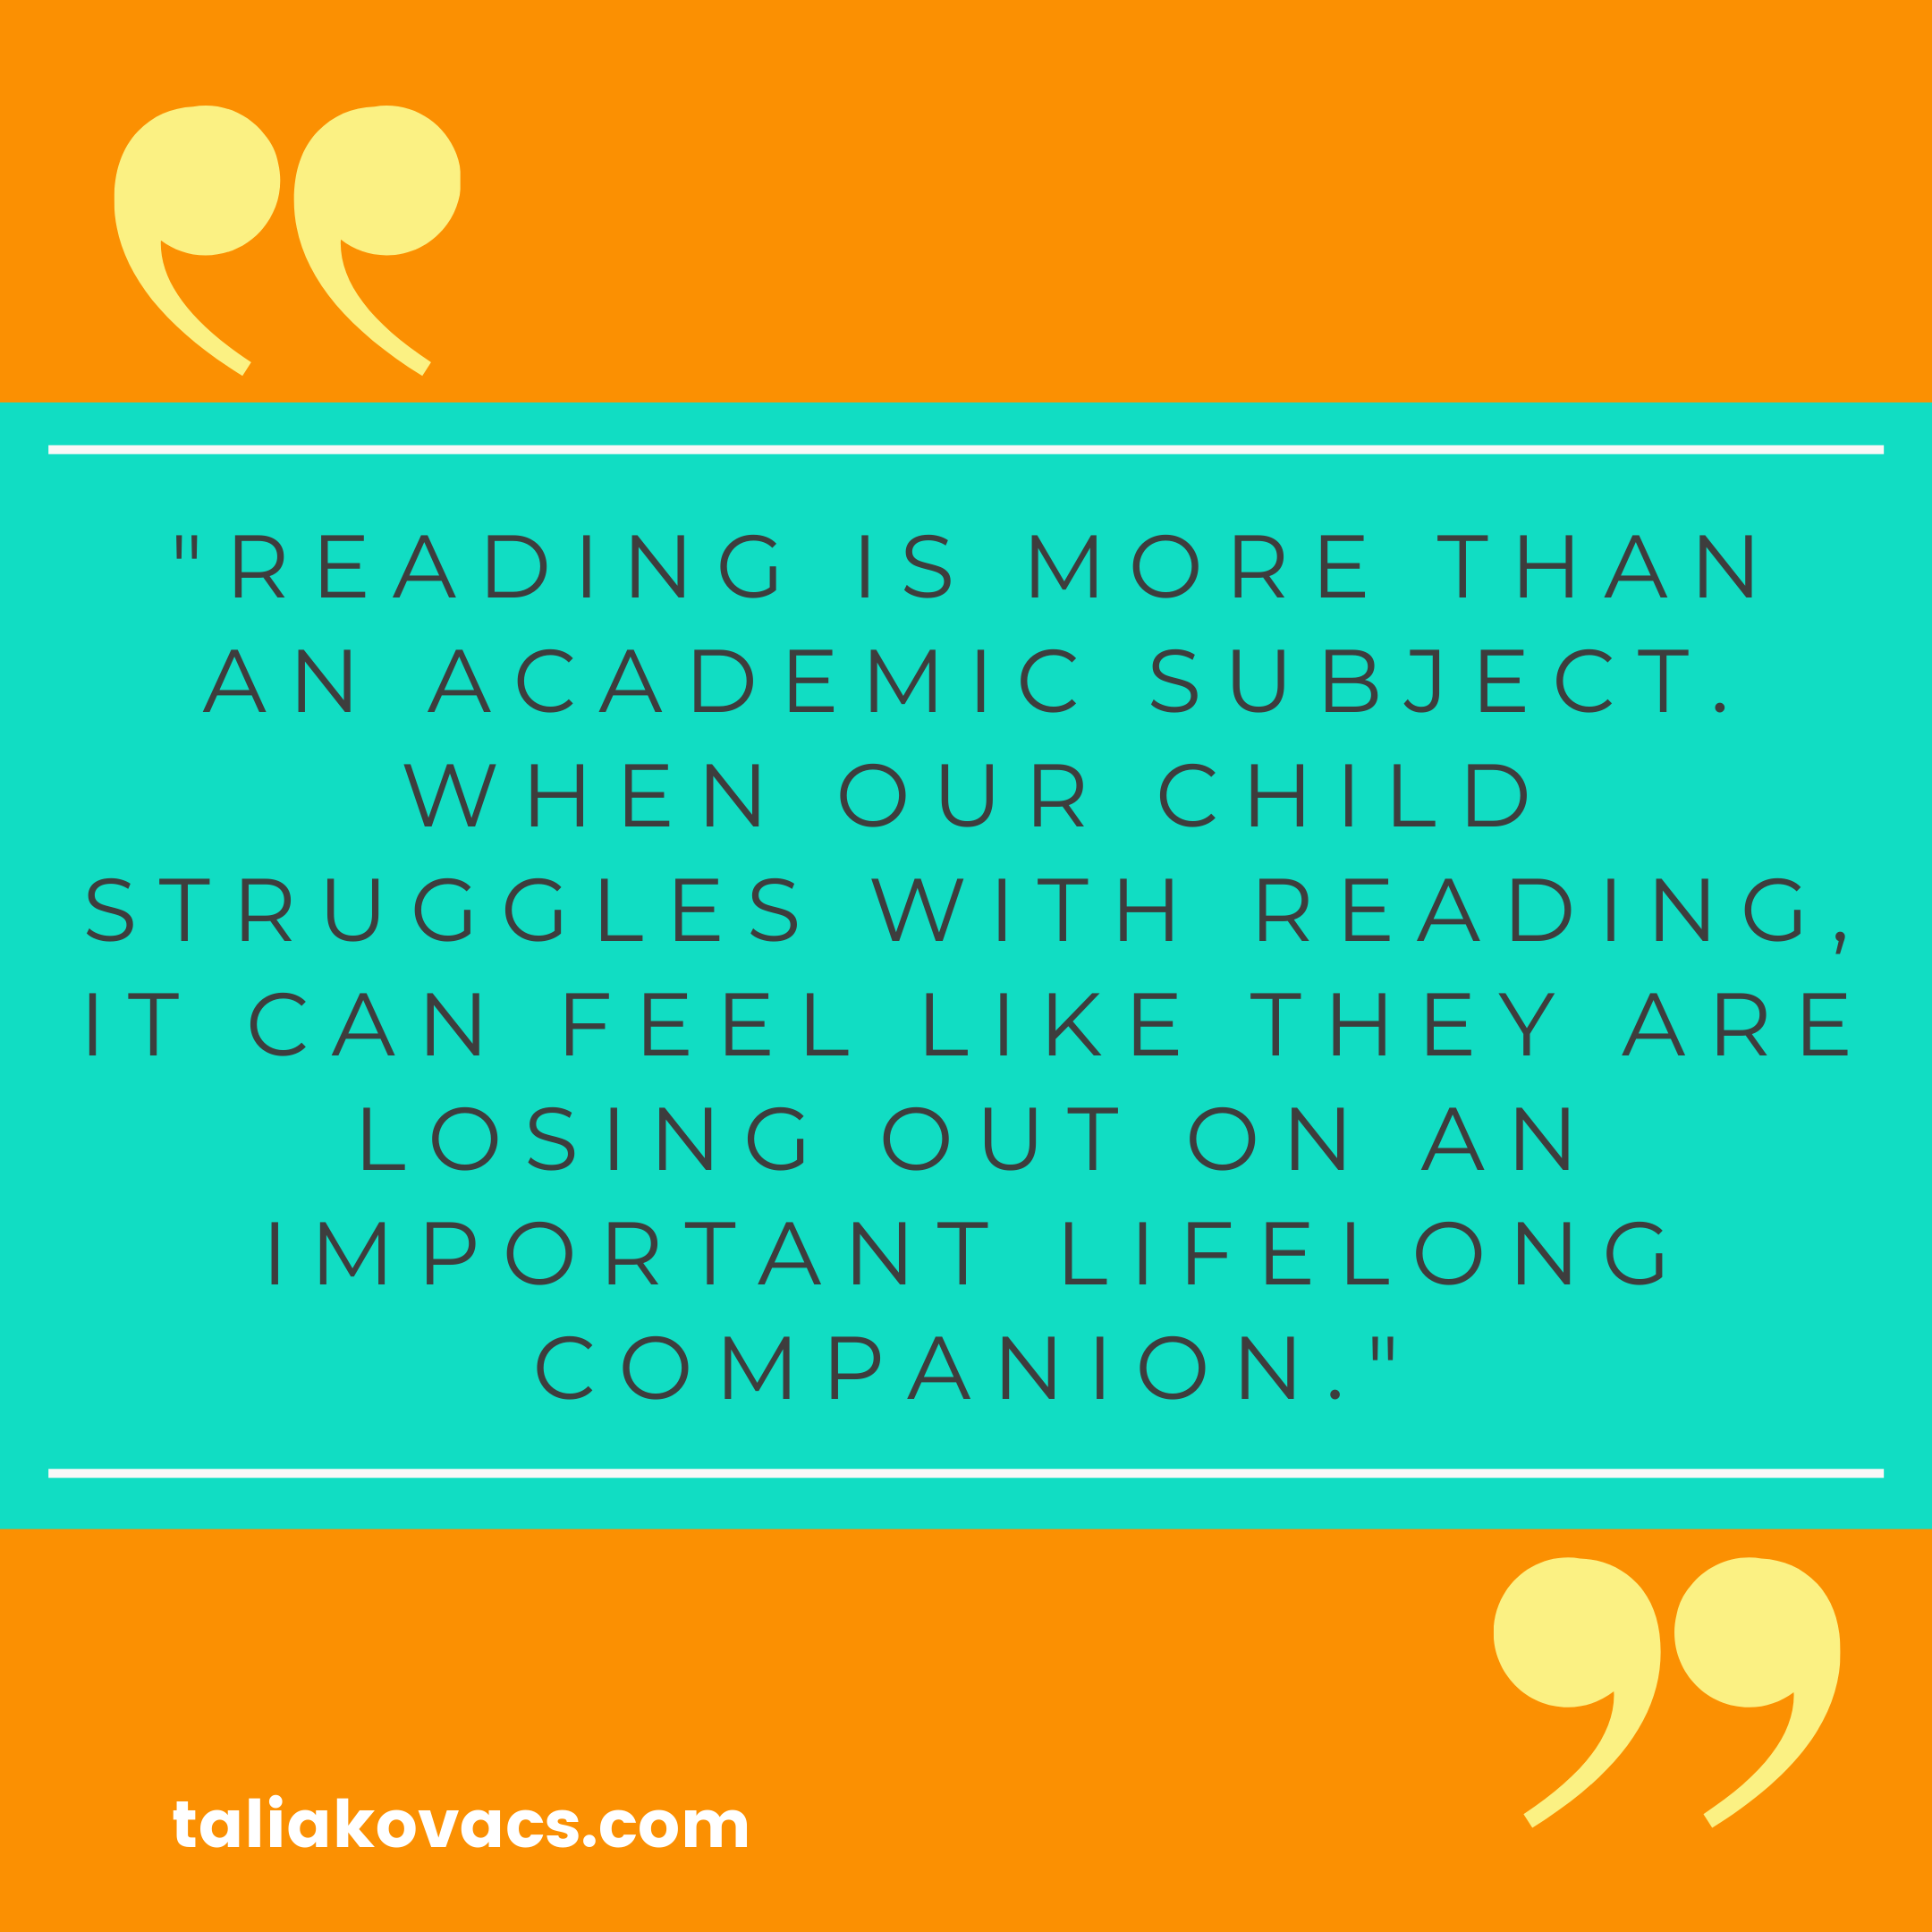 Reading is more than academics.